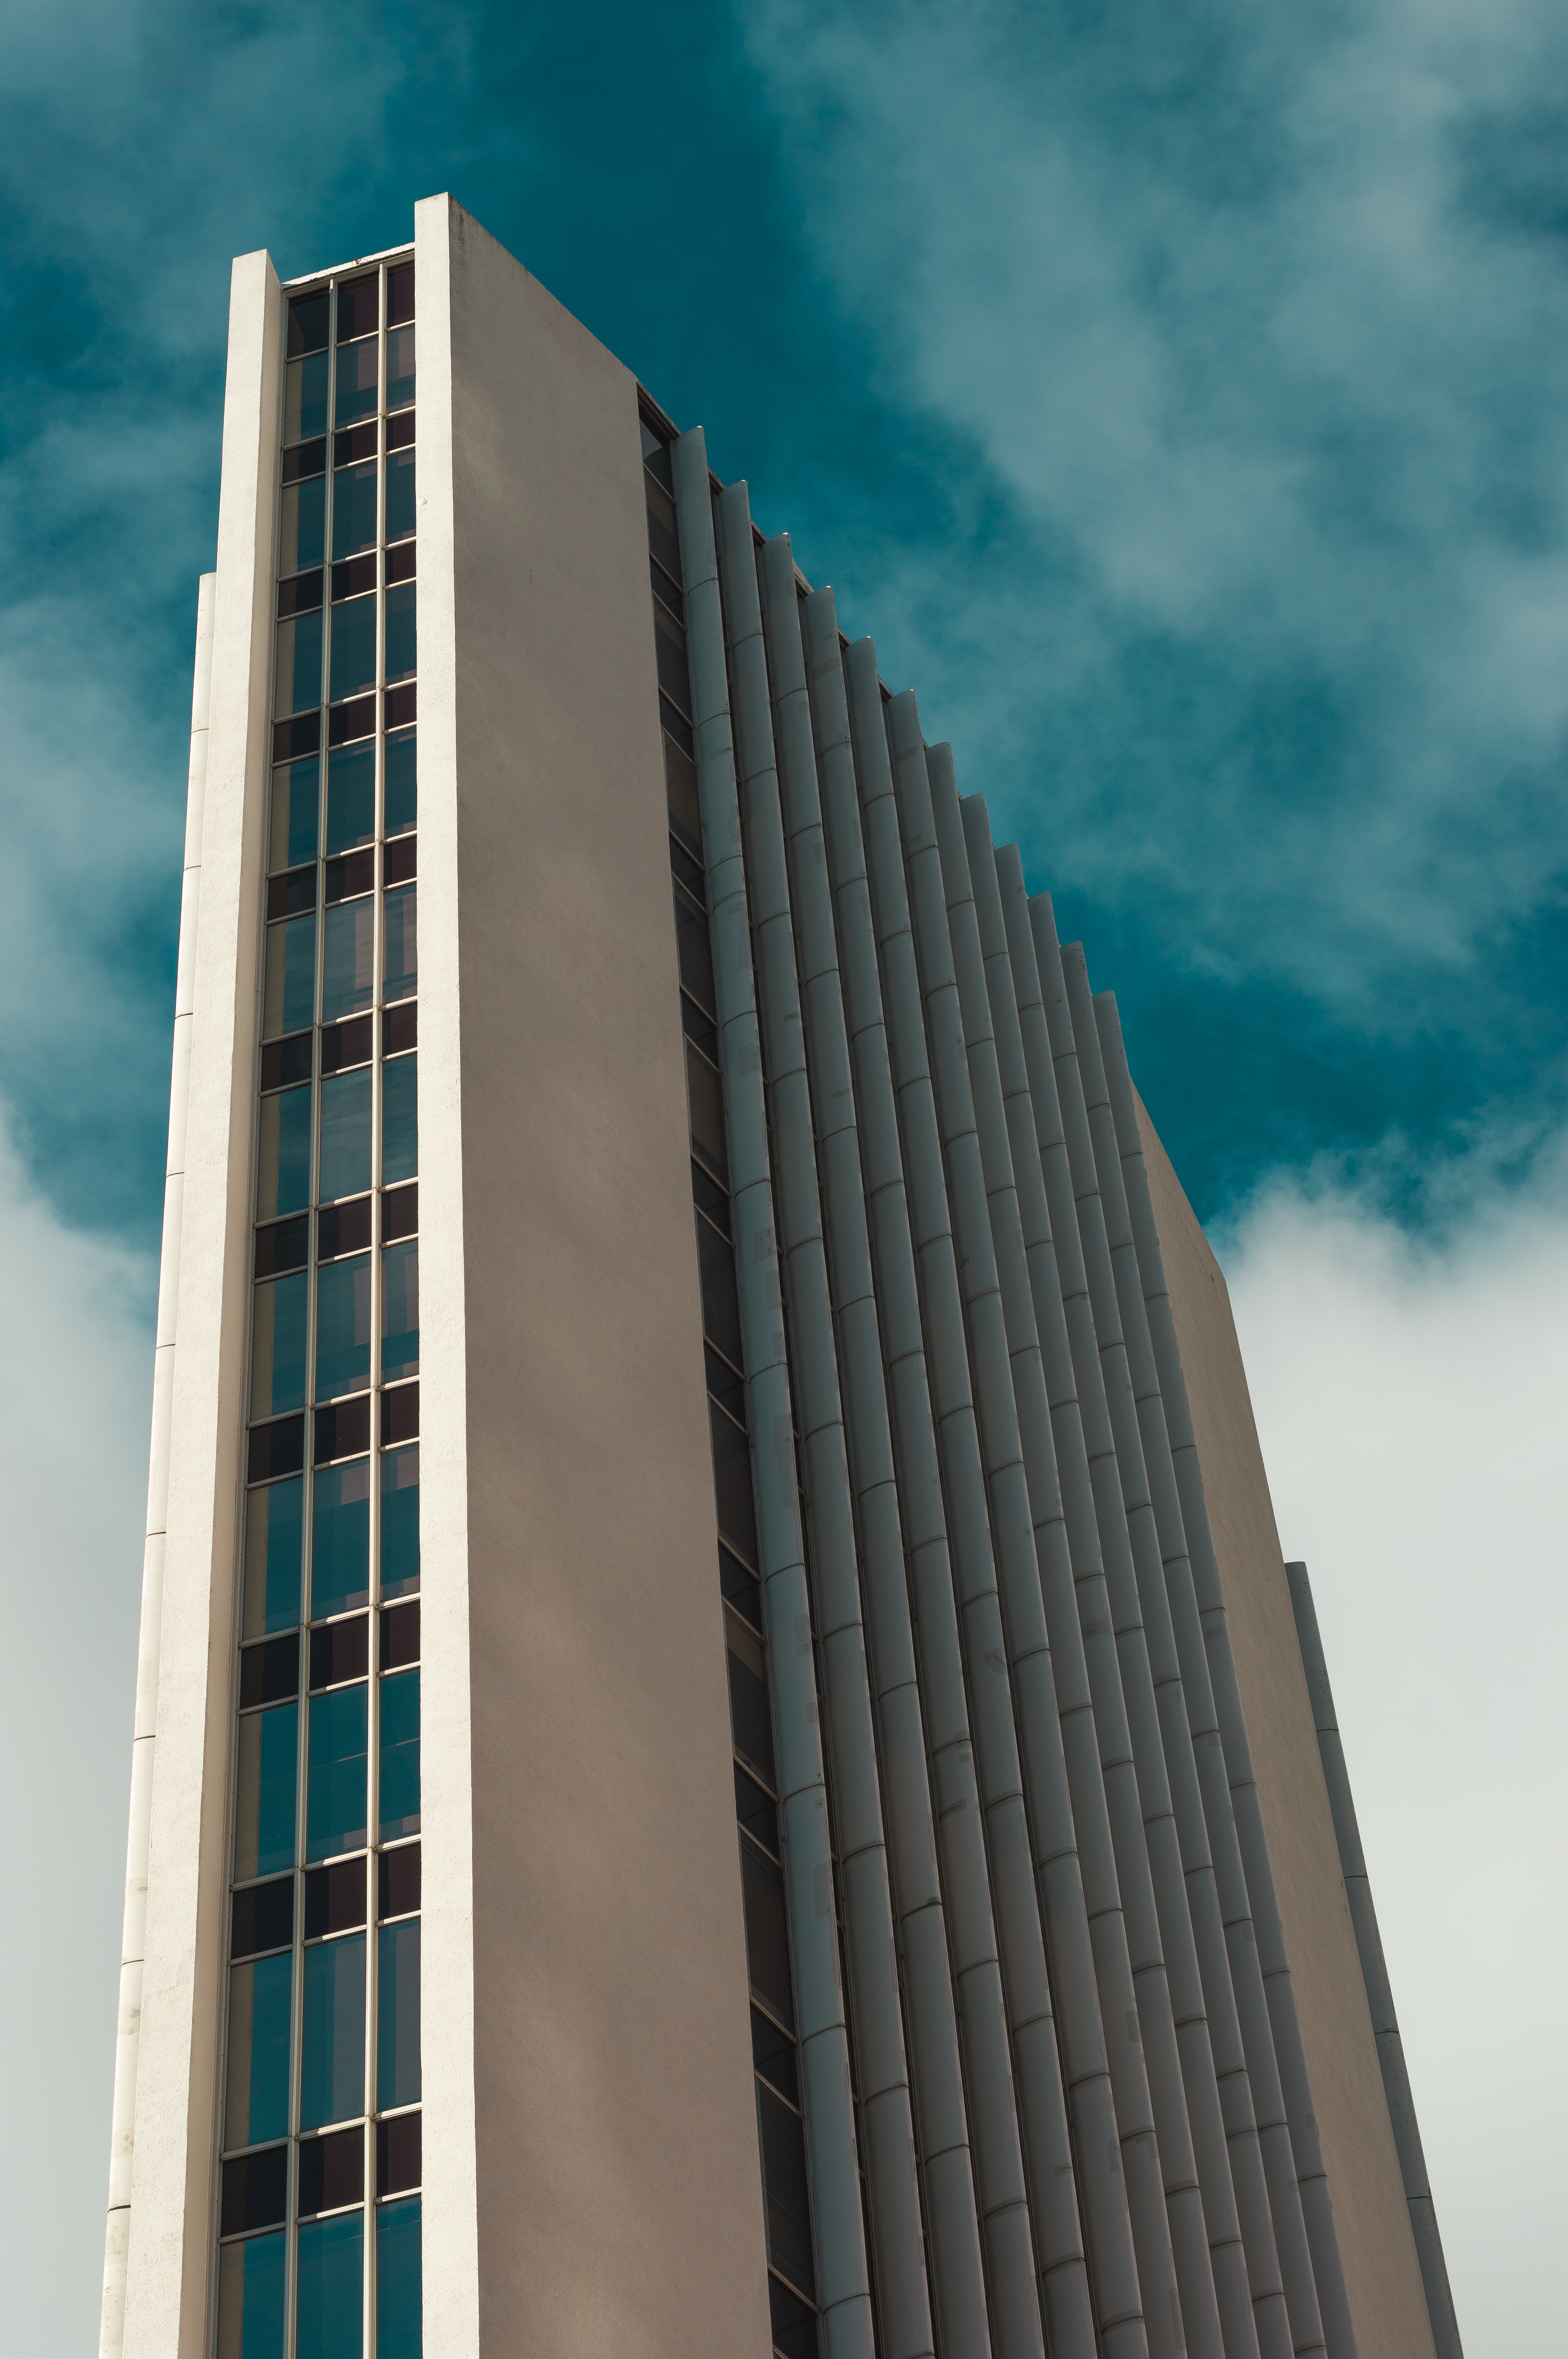 white and gray concrete building in low angle photography